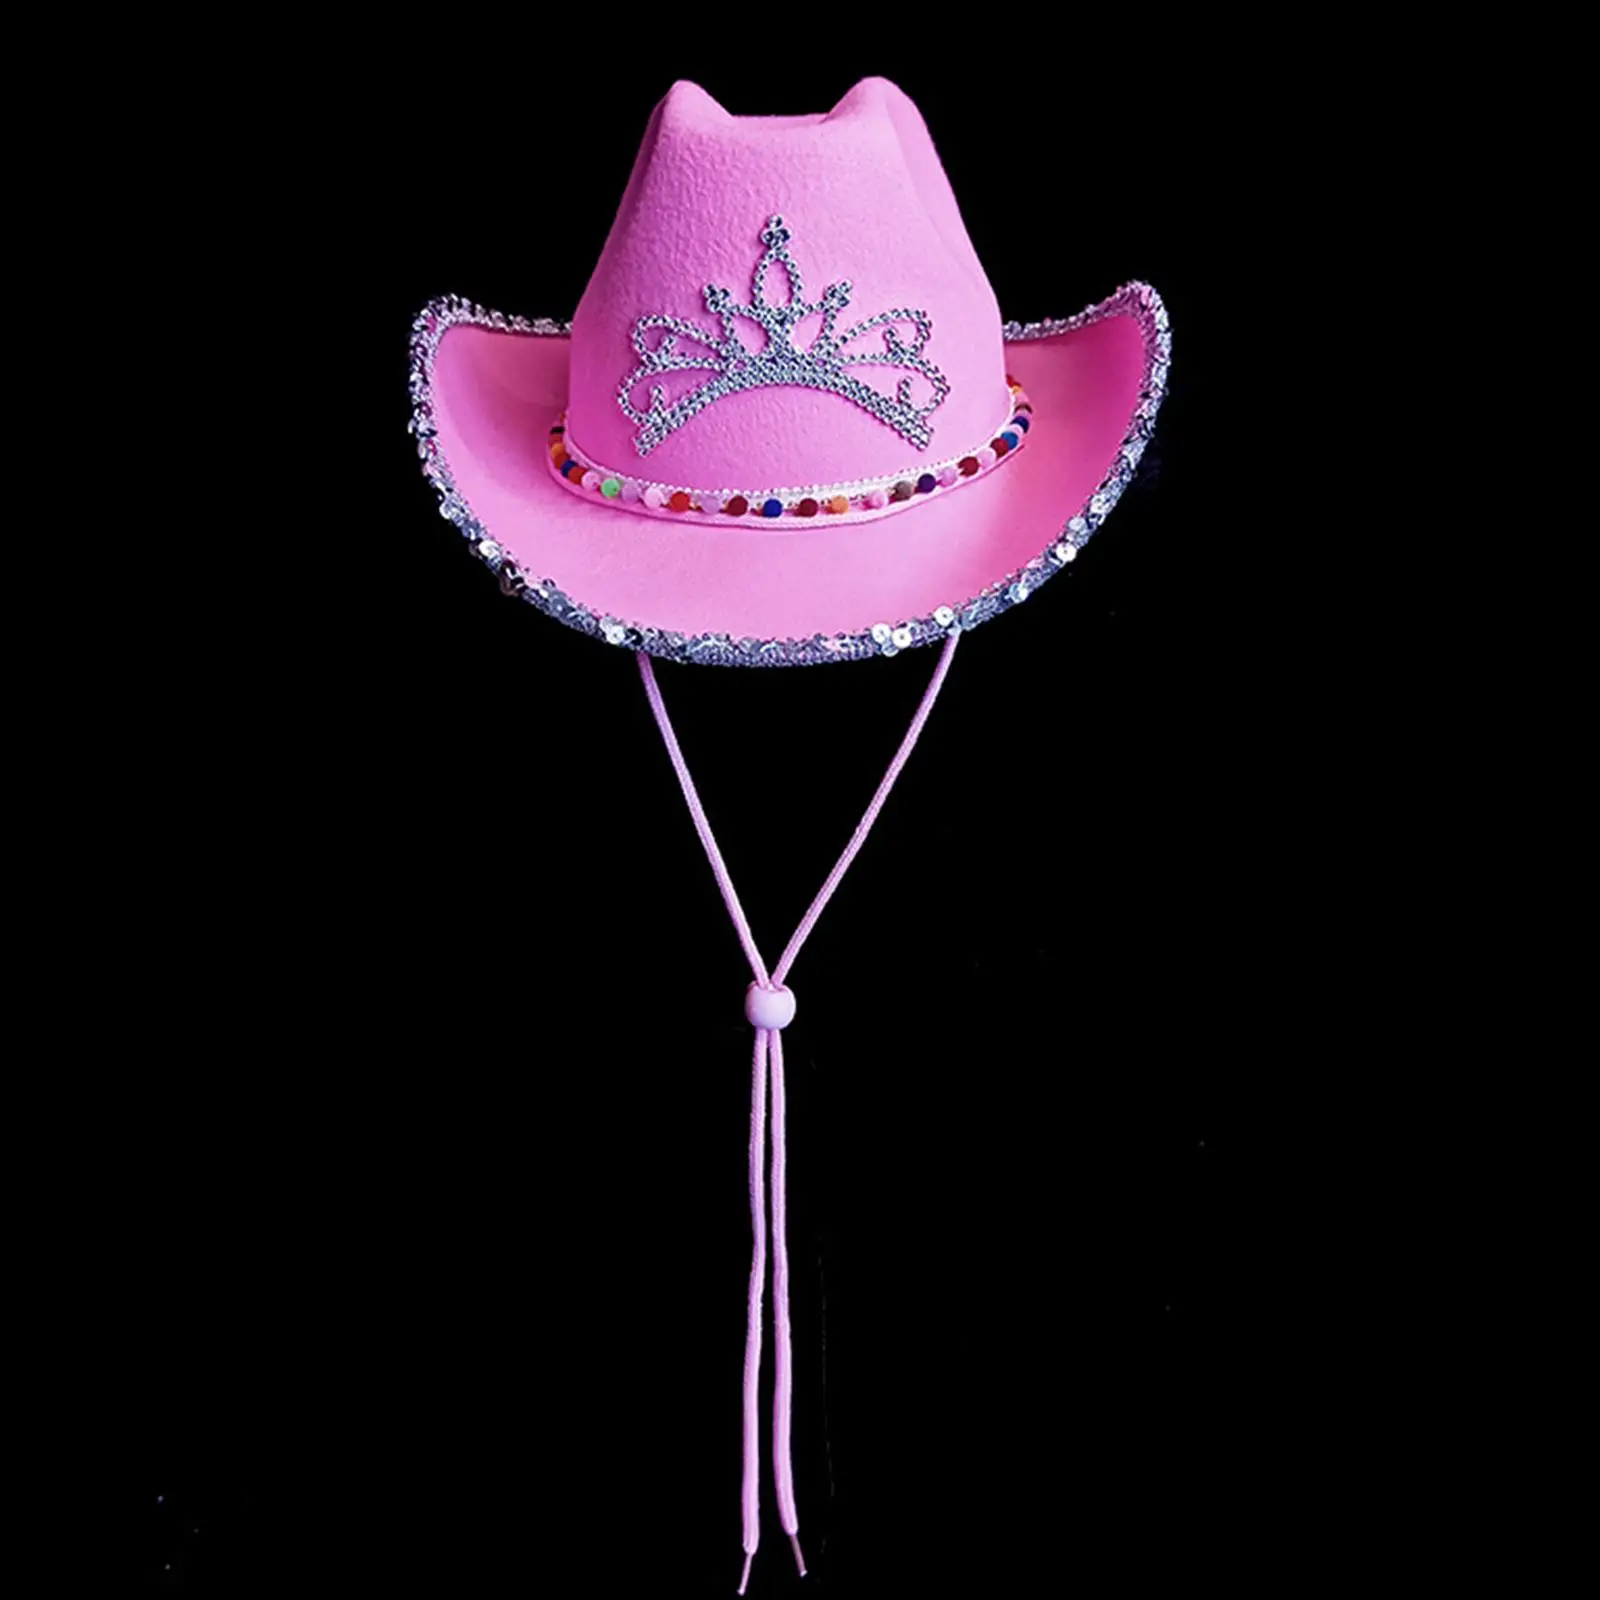 Novelty Cowgirl Hat with Tiara Sun Hats Cowboy Hat for Play Women Dress Up